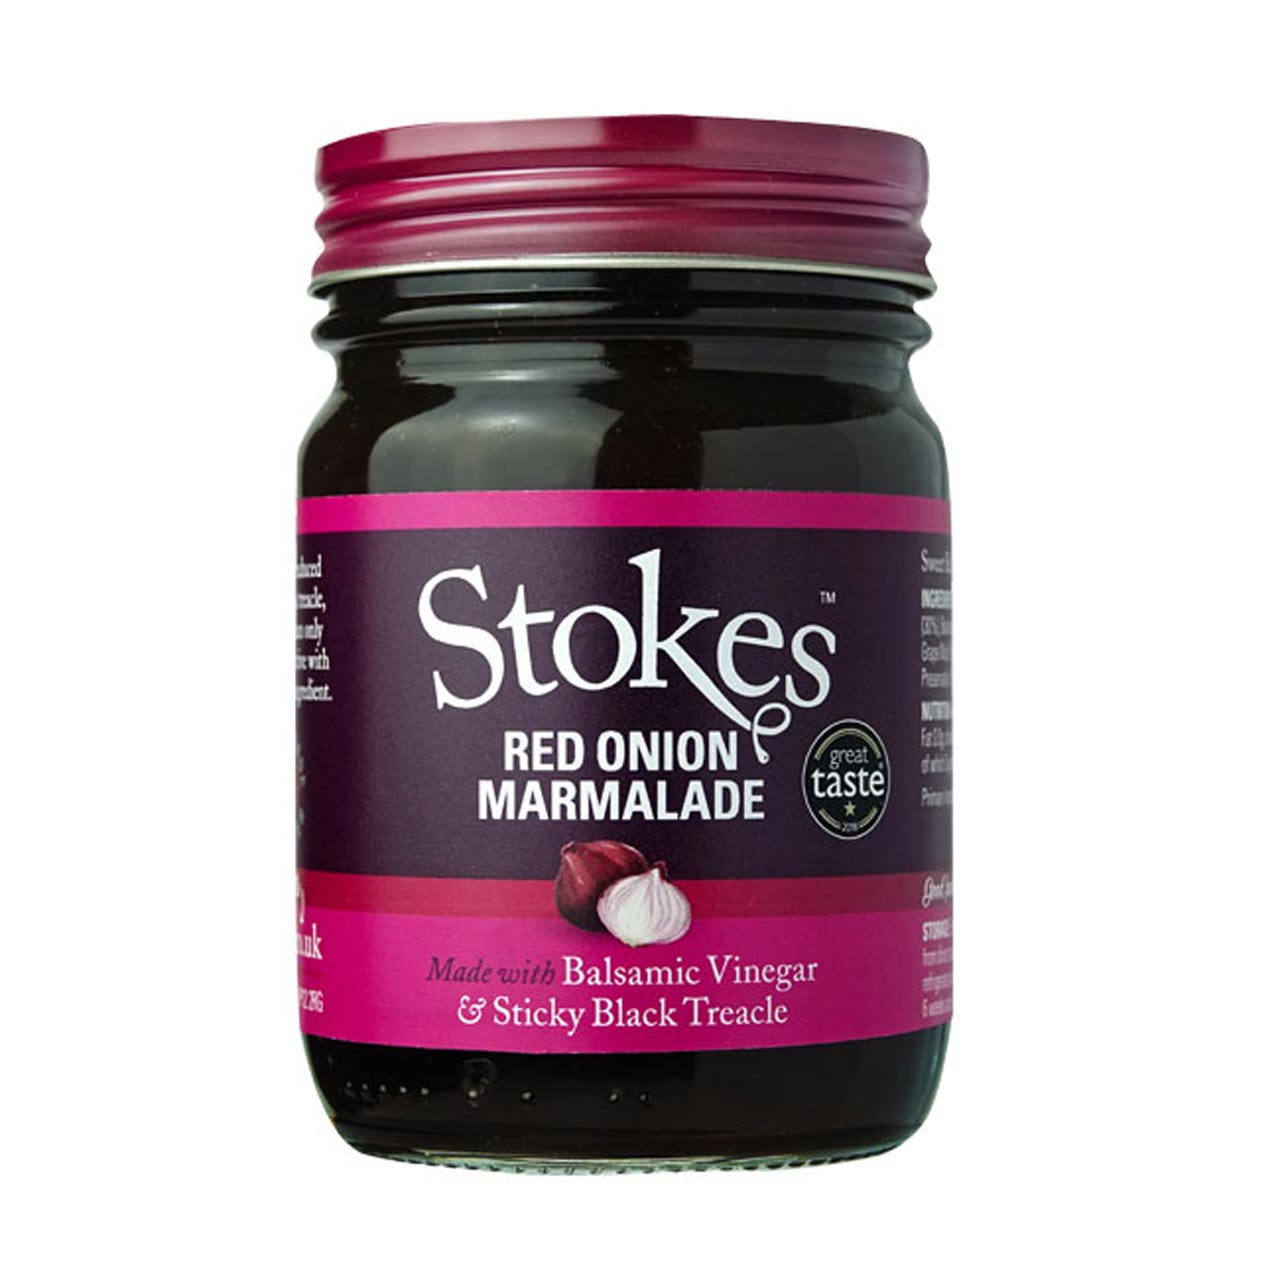 Stokes Sauces Red Onion Marmalade - 265g